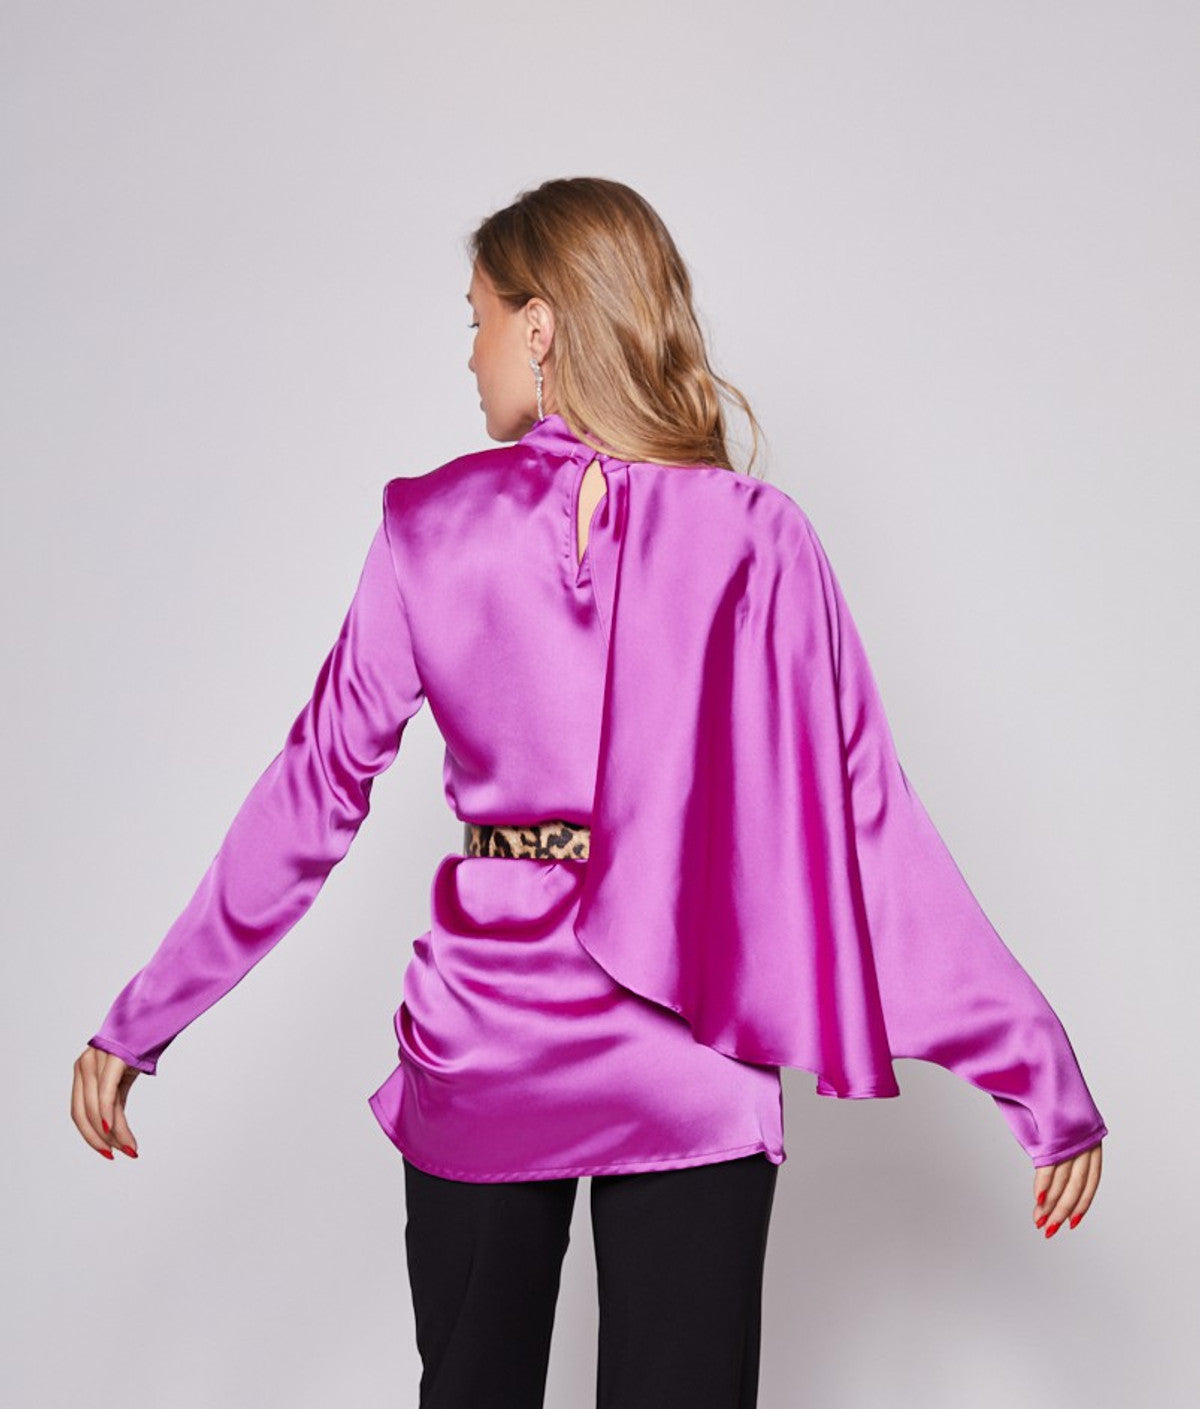 Blouse with Cape Sleeve